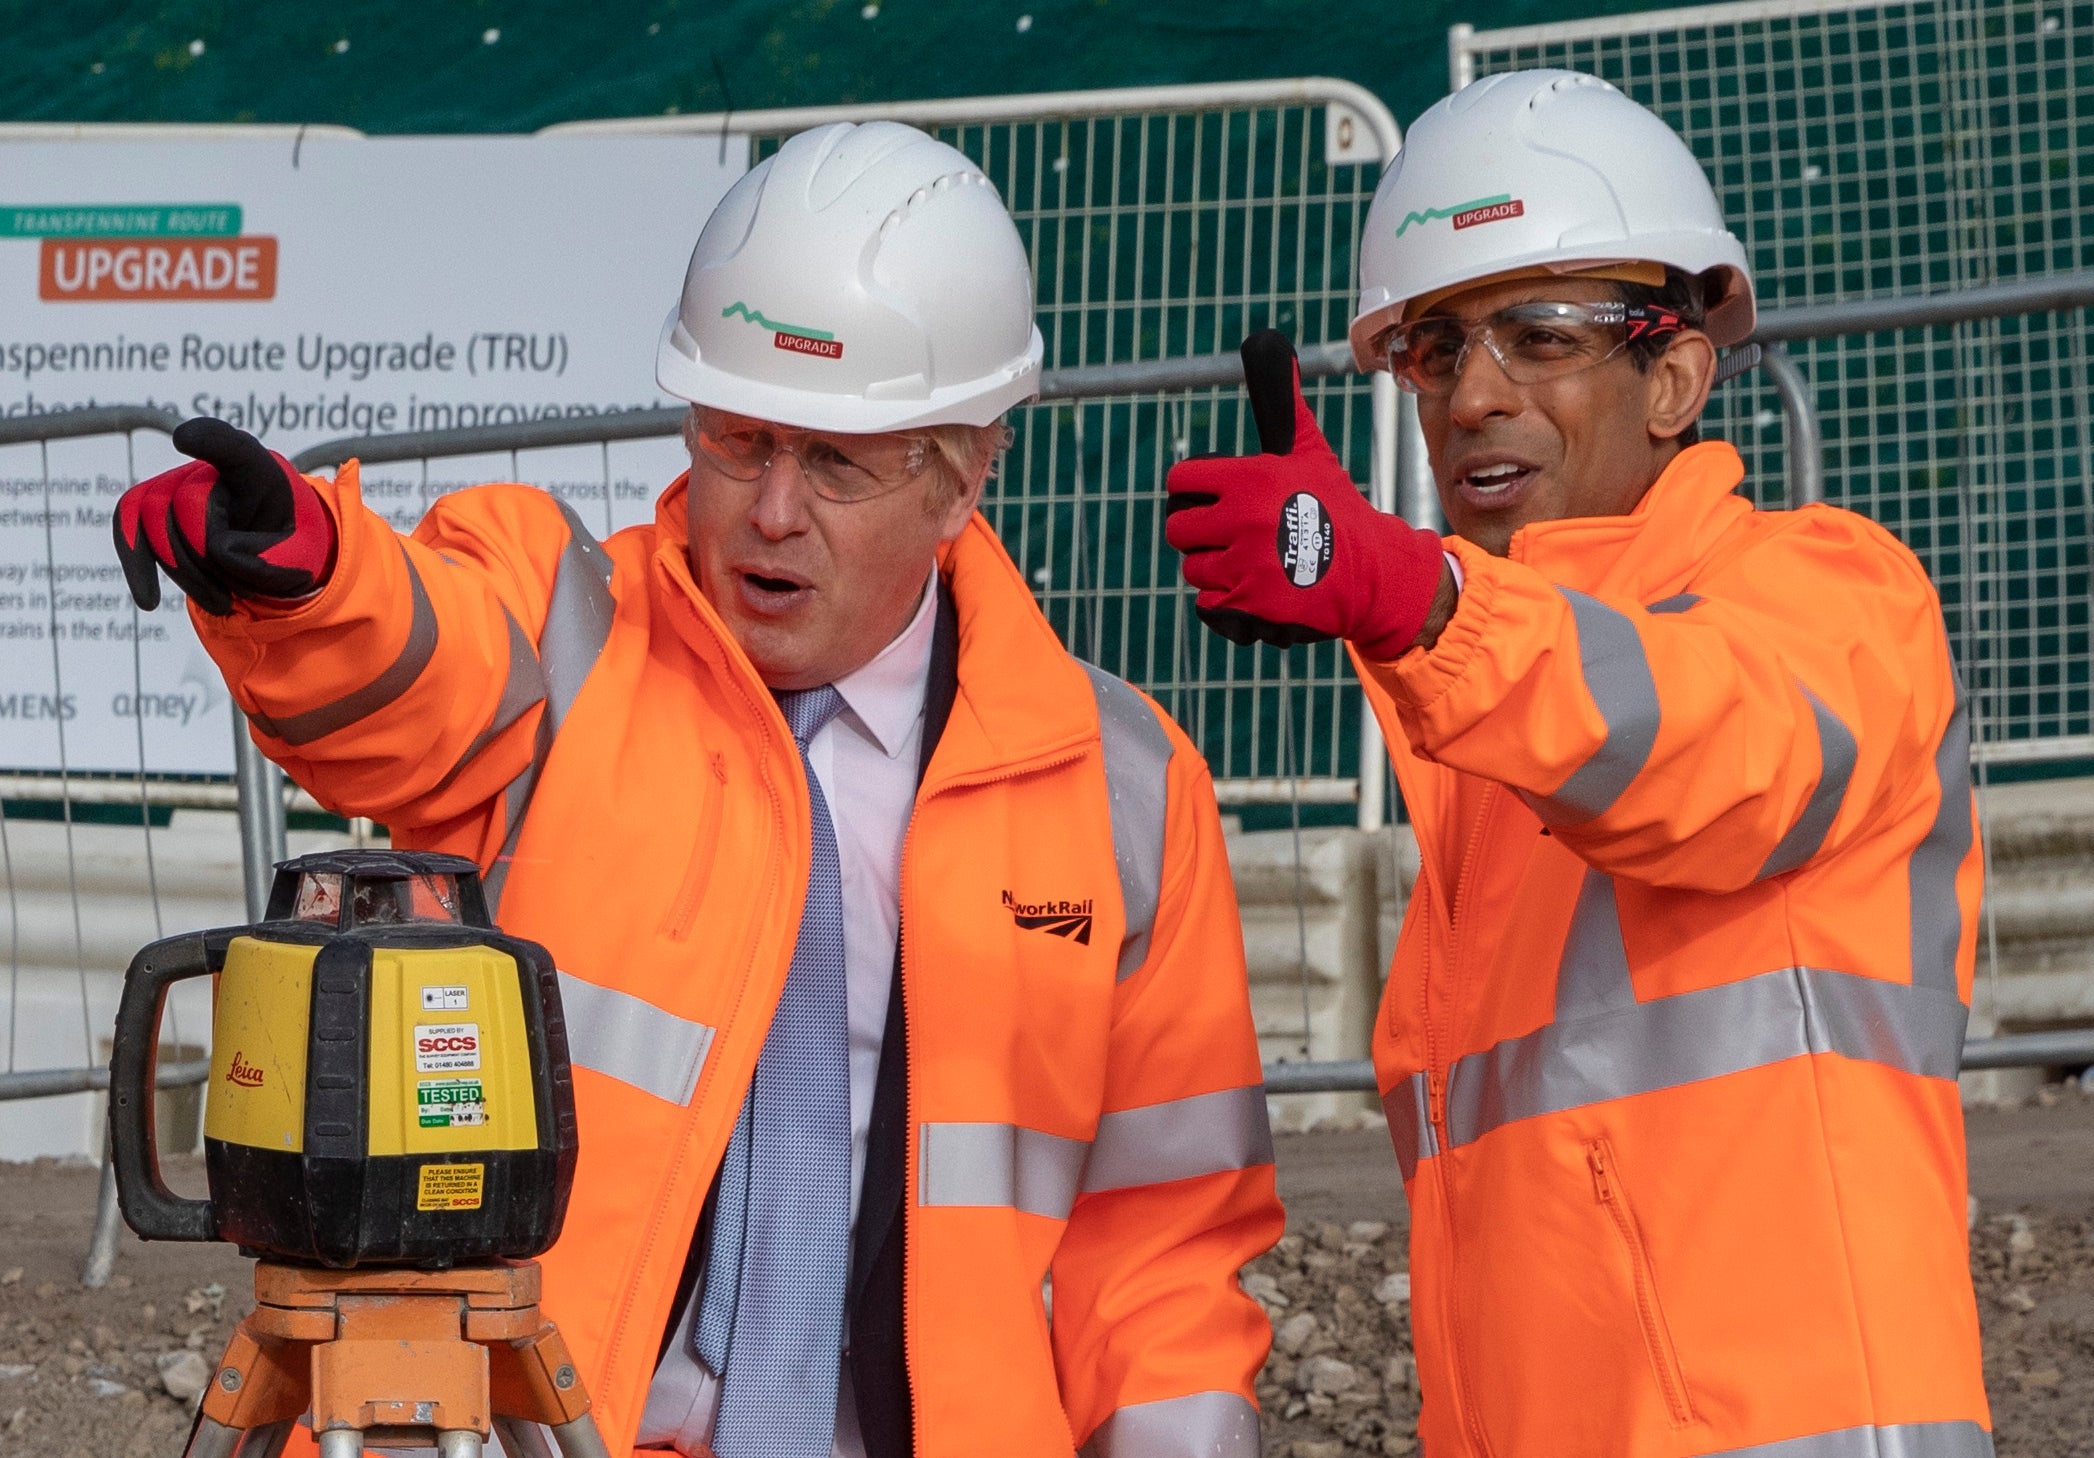 Boris Johnson has reportedly backed a bailout for energy-intensive industries, with chancellor Rishi Sunak under pressure to do the same